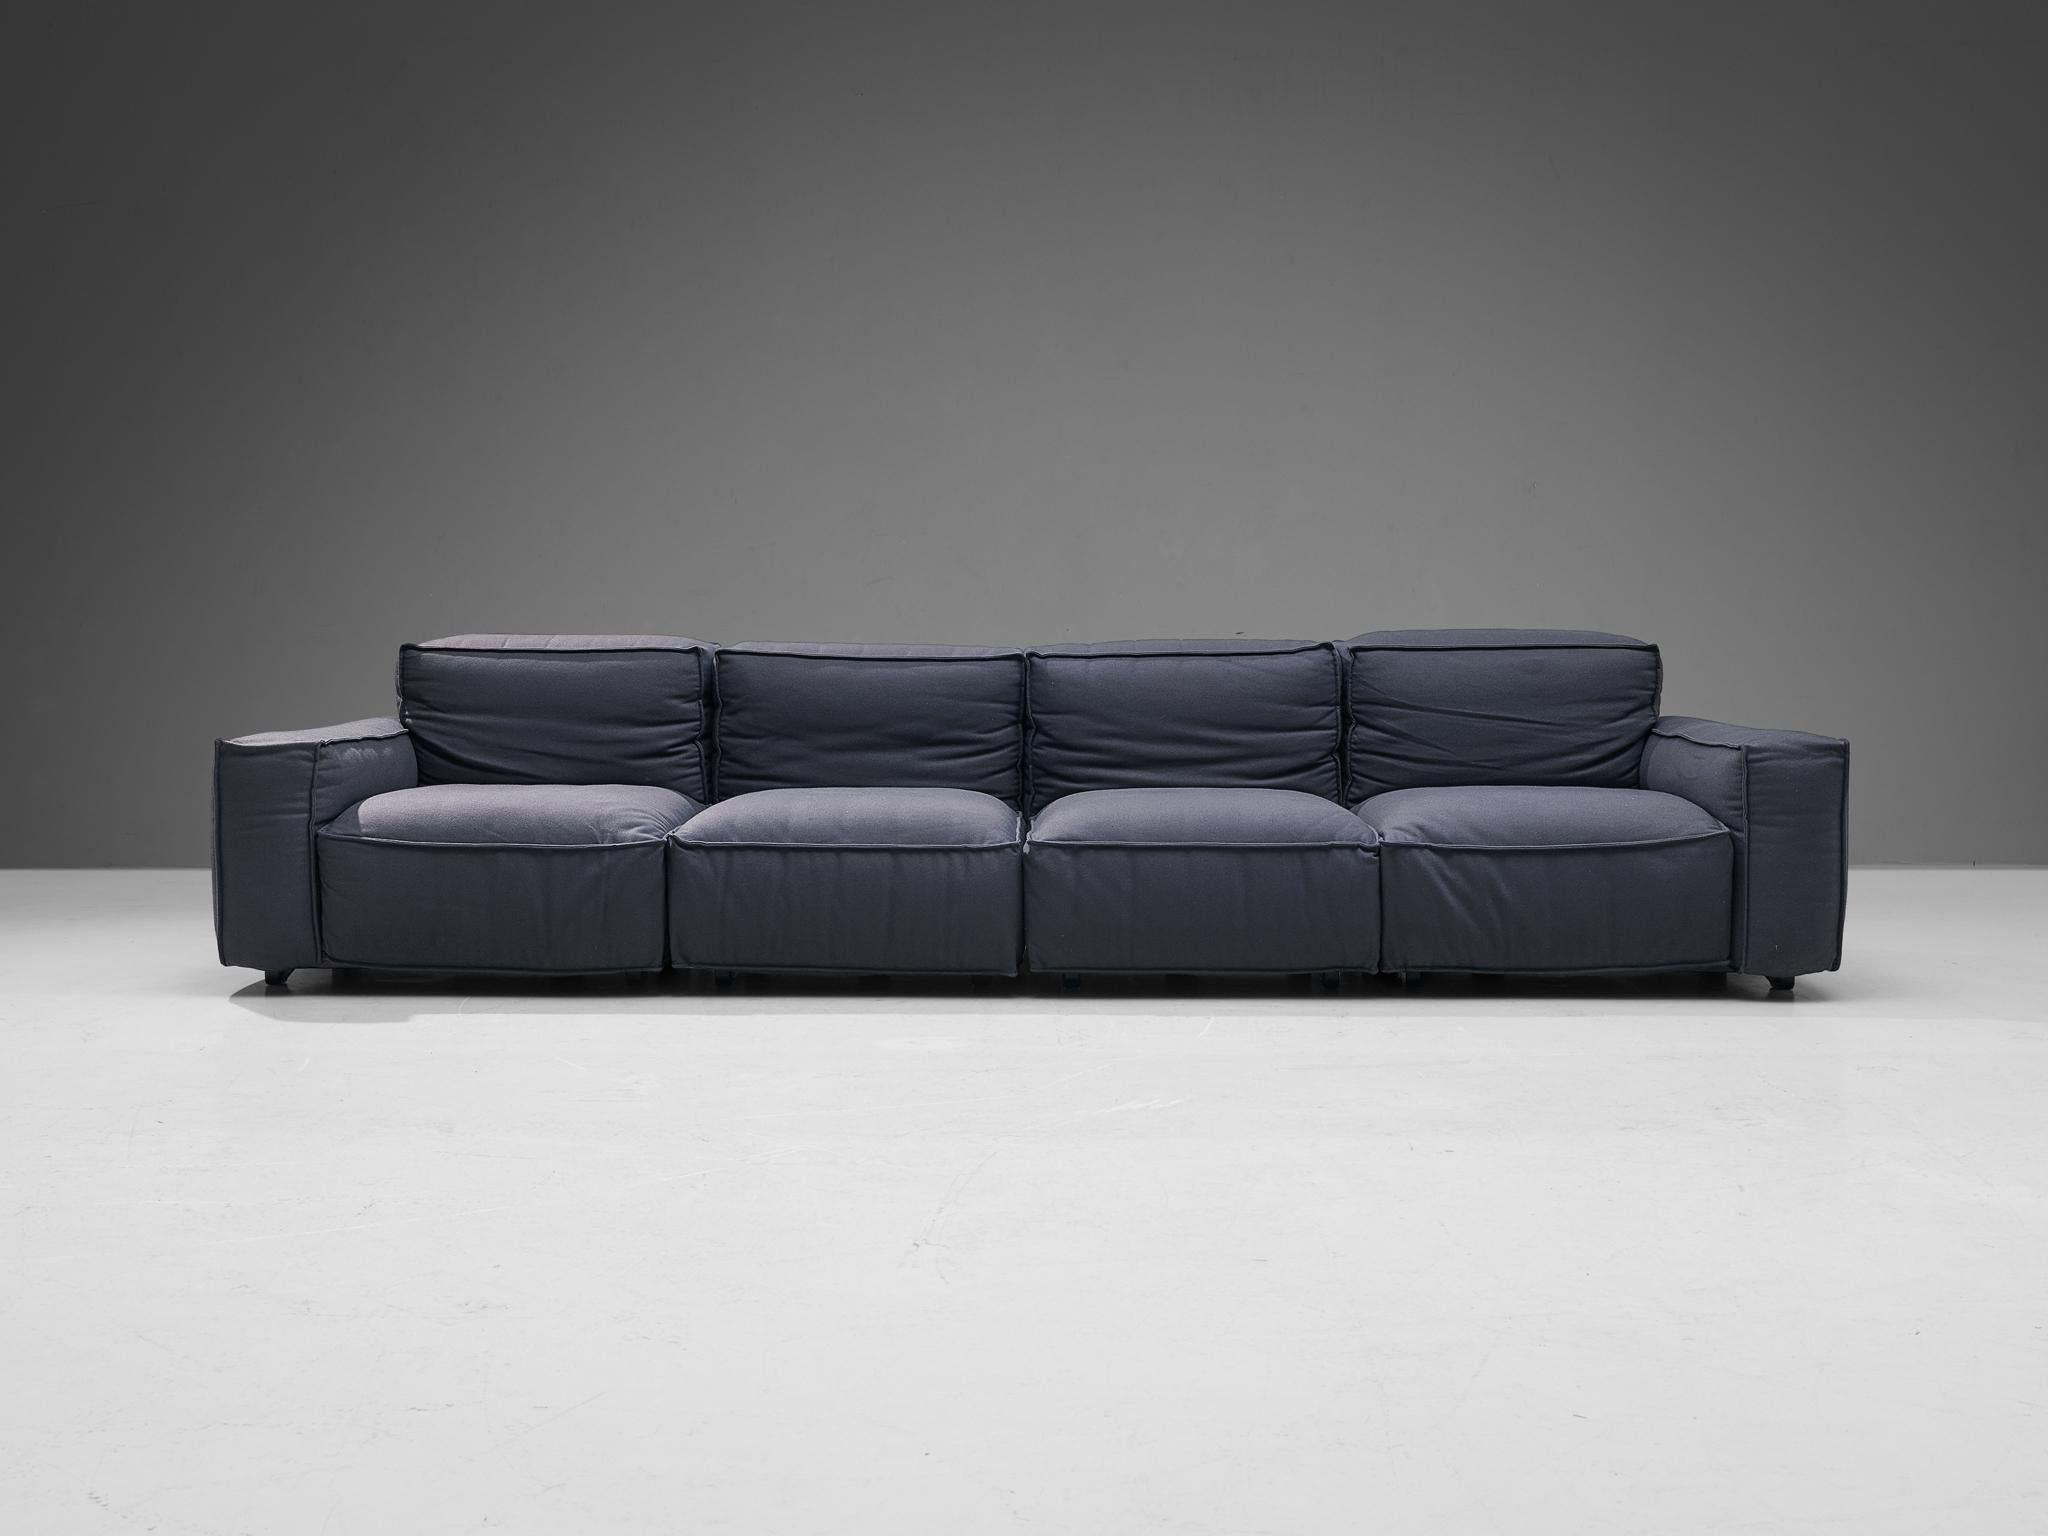 Metal Mario Marenco for Arflex Four-Seater Sofa's in Blue Woolen Upholstery